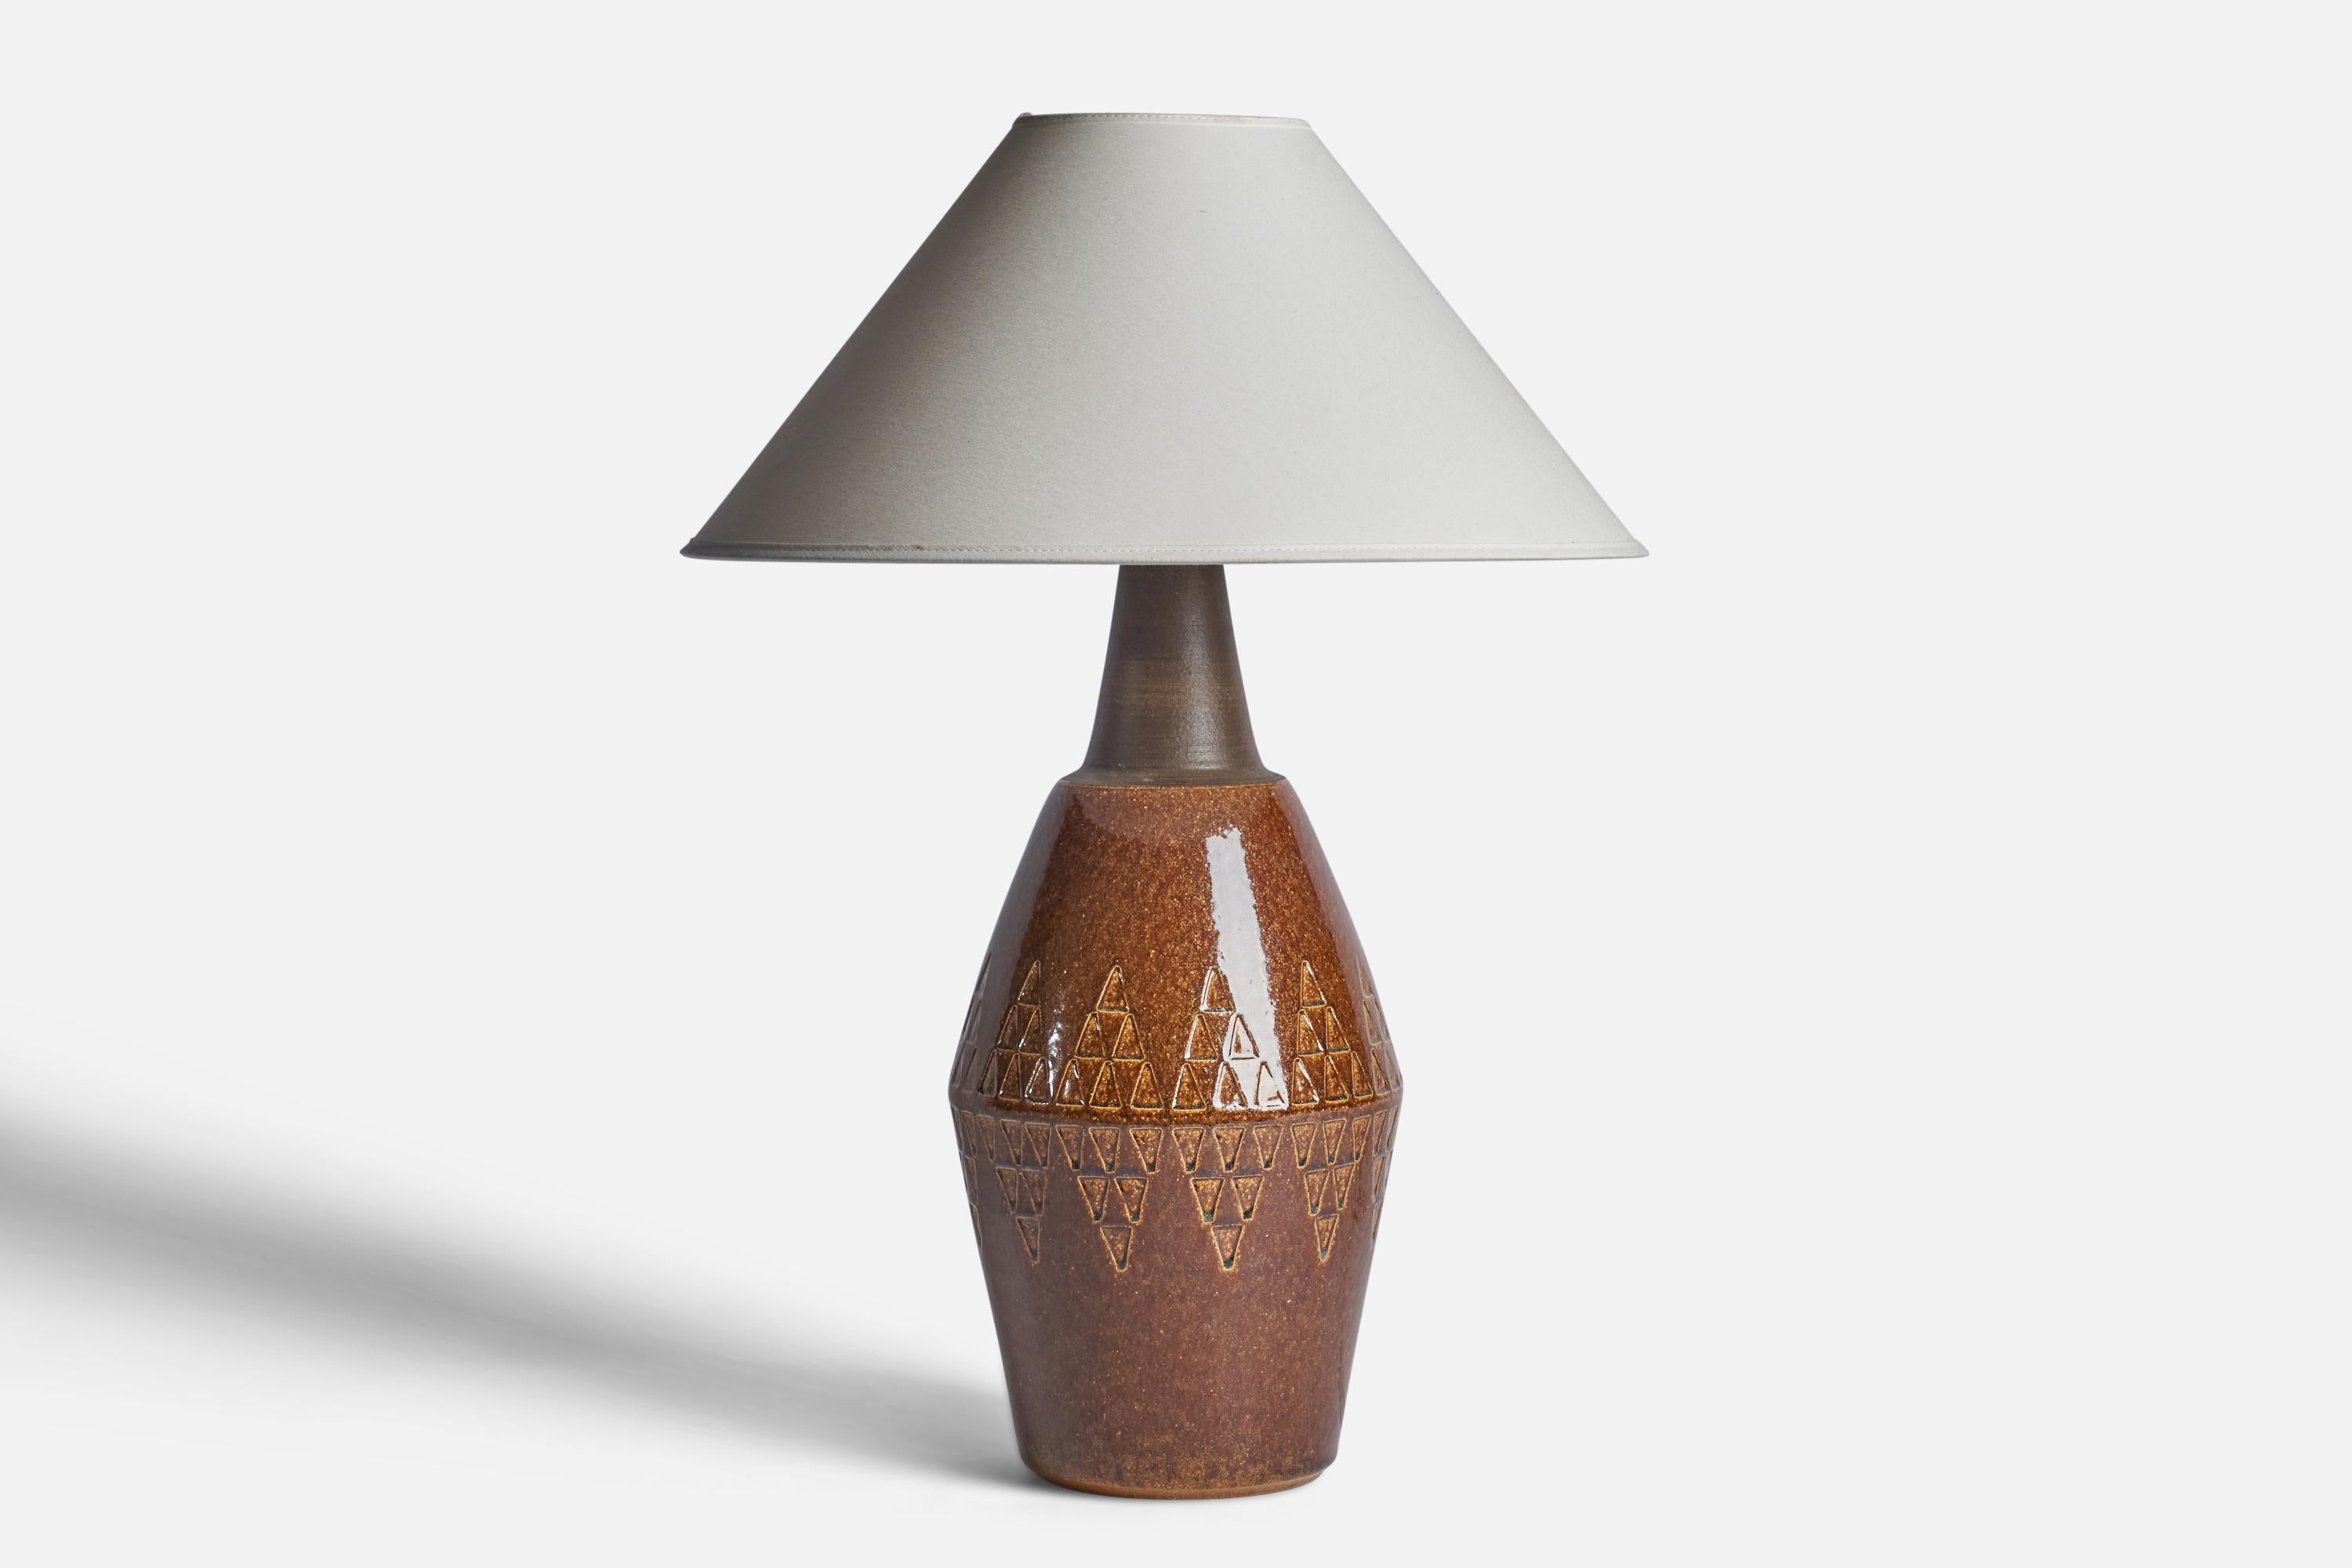 A brown-glazed and incised stoneware table lamp designed and produced by Søholm, Bornholm, Denmark 1960s.

Dimensions of Lamp (inches): 18.5